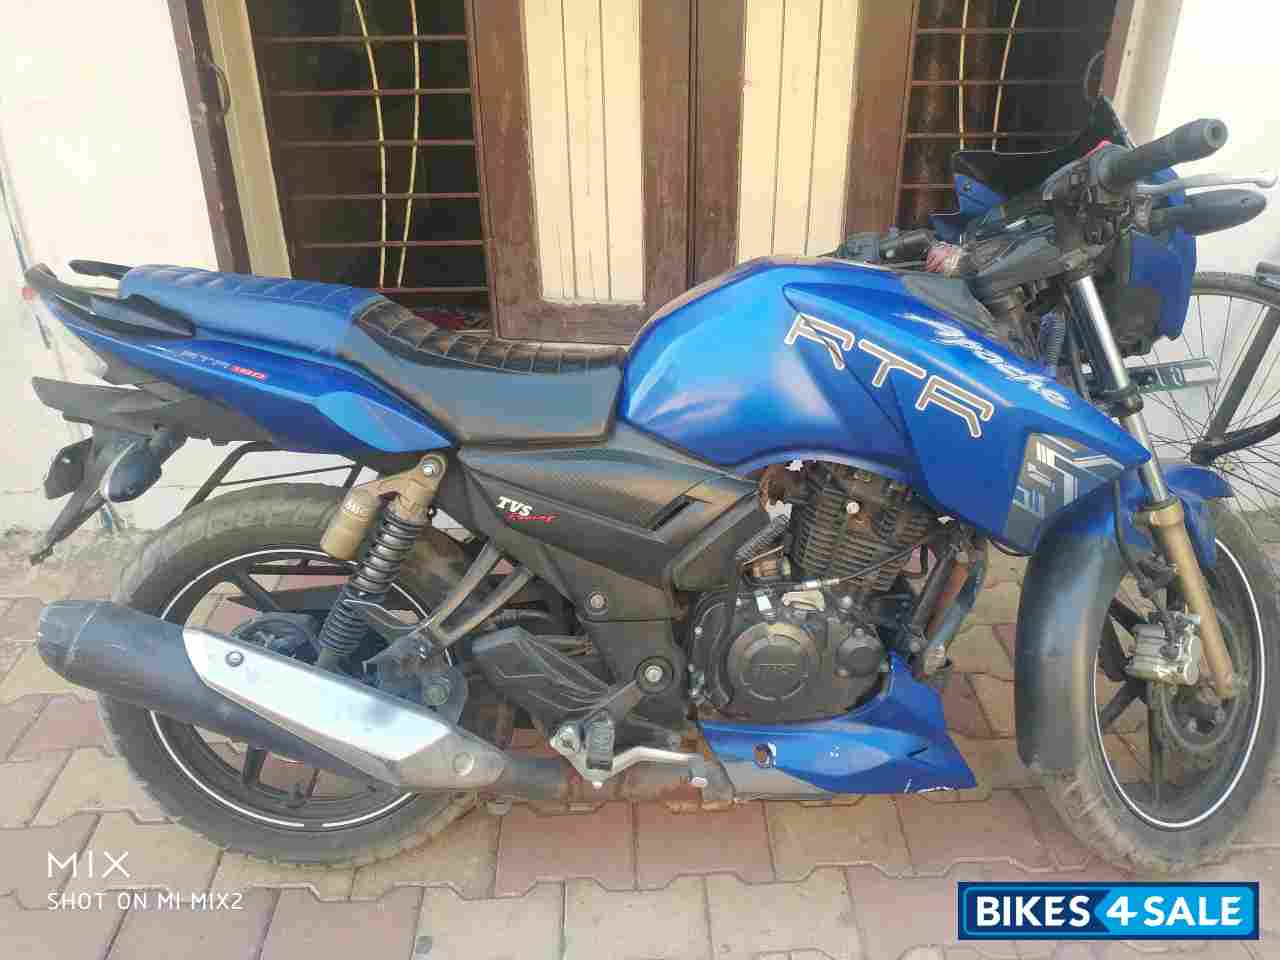 Used 2016 Model Tvs Apache Rtr 180 Abs For Sale In Ahmedabad Id 200296 Blue Colour Bikes4sale